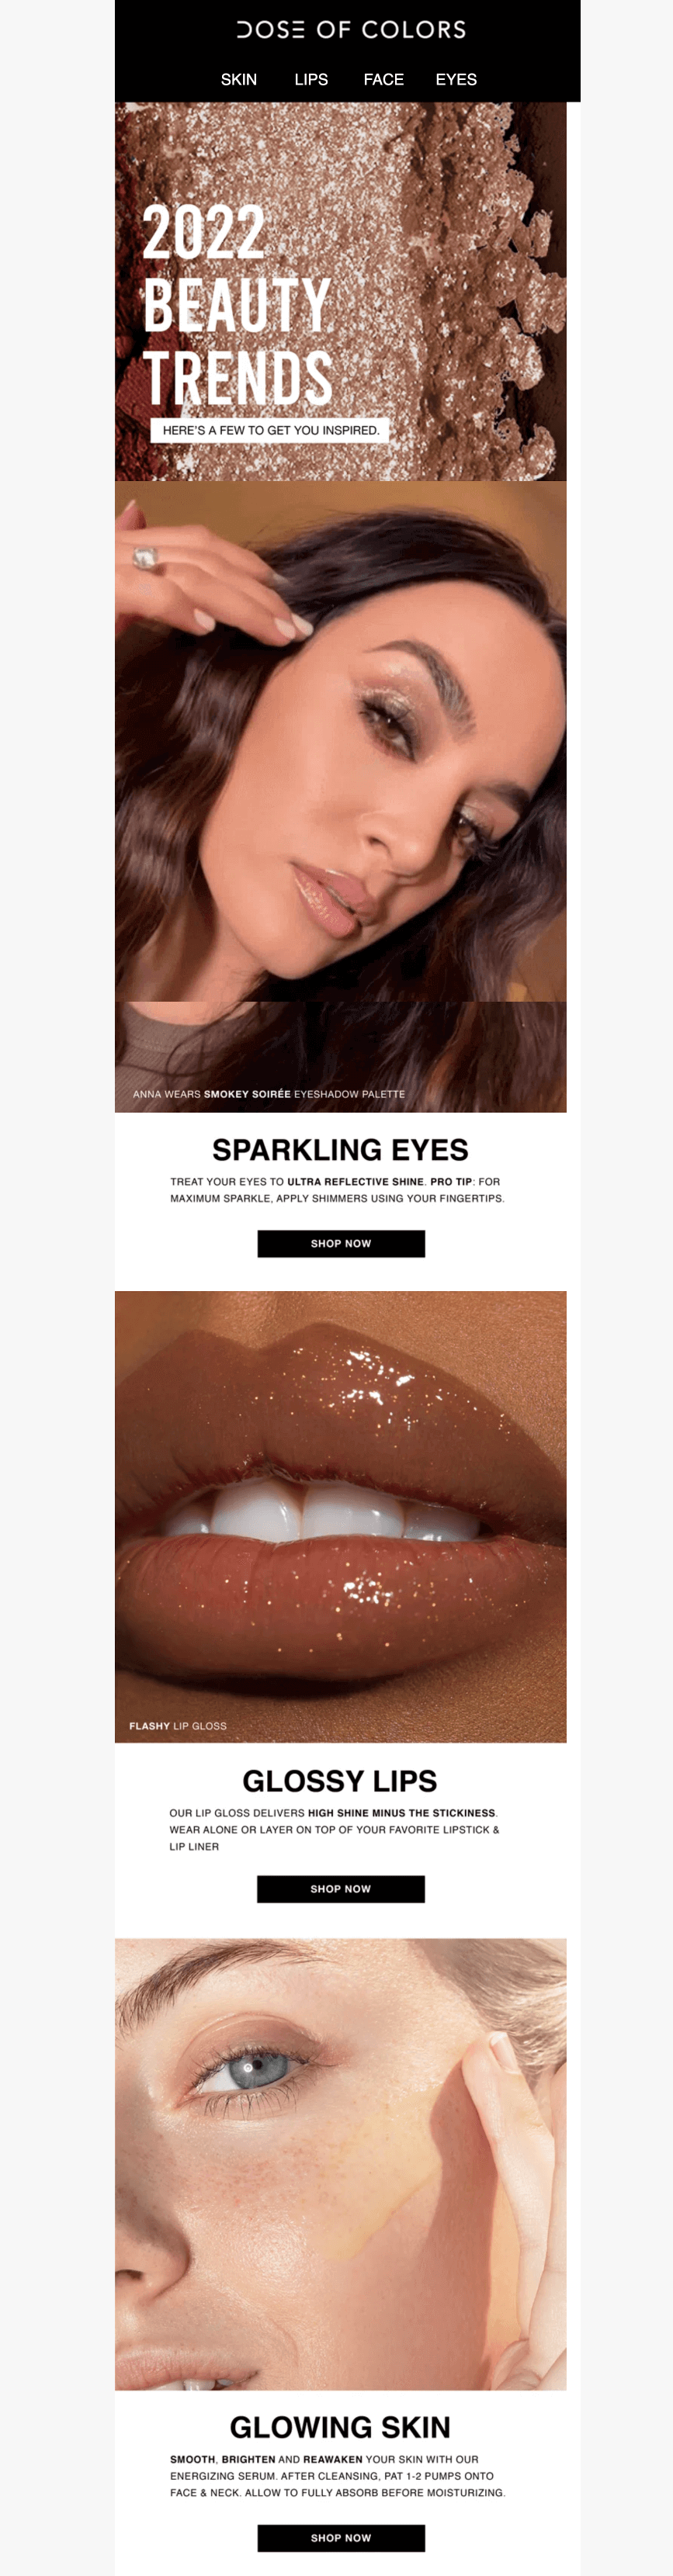 An email predicting beauty trends of the coming year: sparkling eyes, glossy lips, glowing skin.